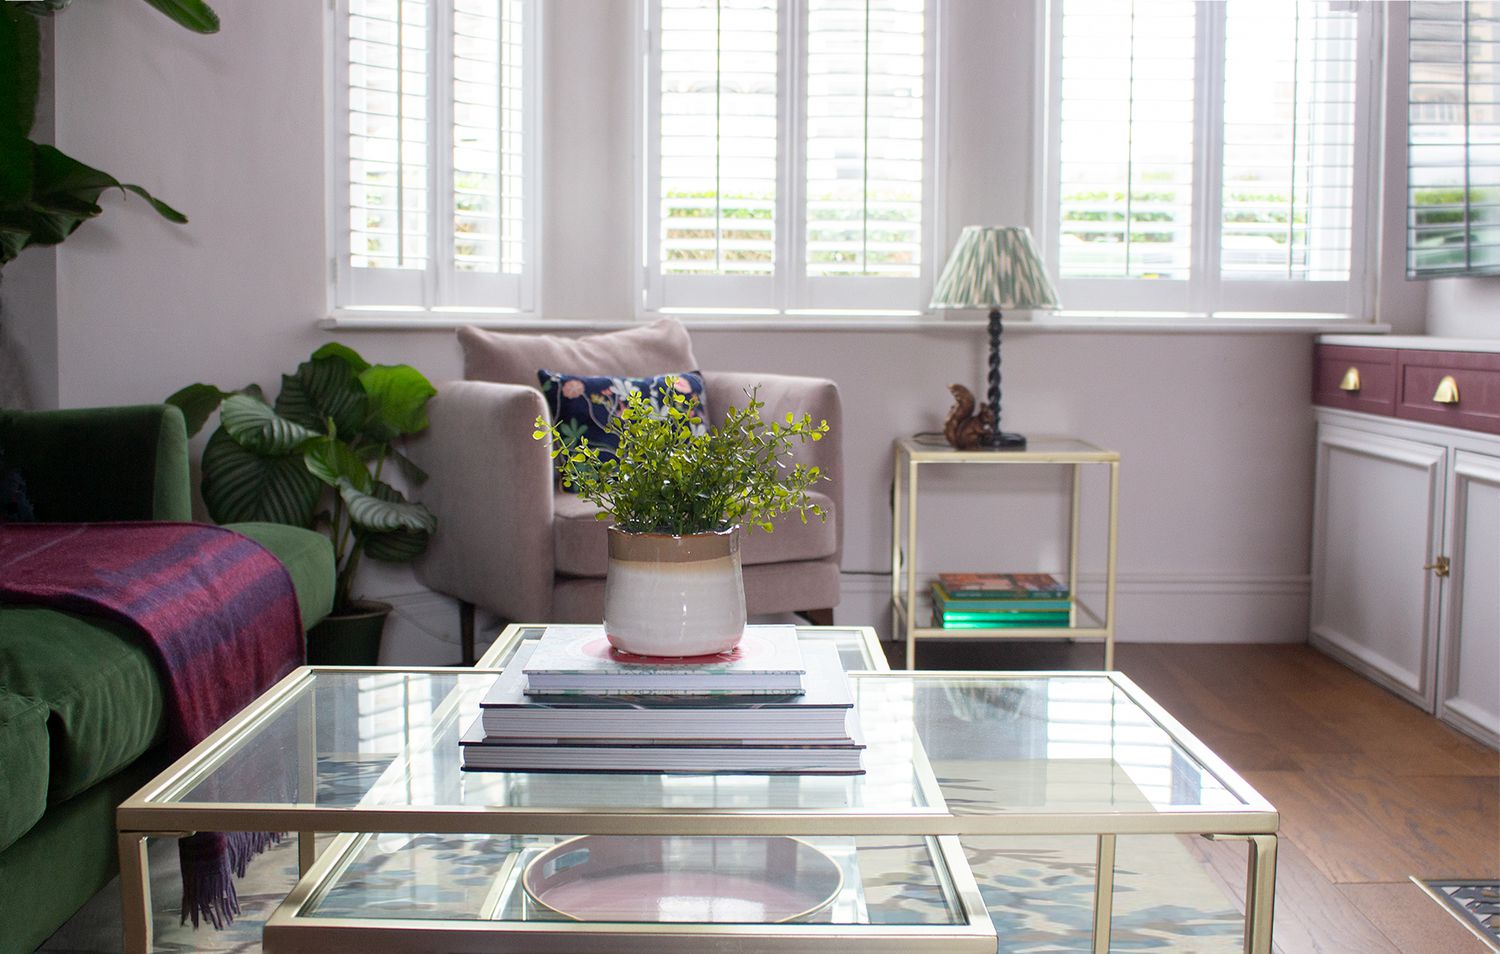 A photo of the view to the bay window, with the focus on the coffee table and plant on it.